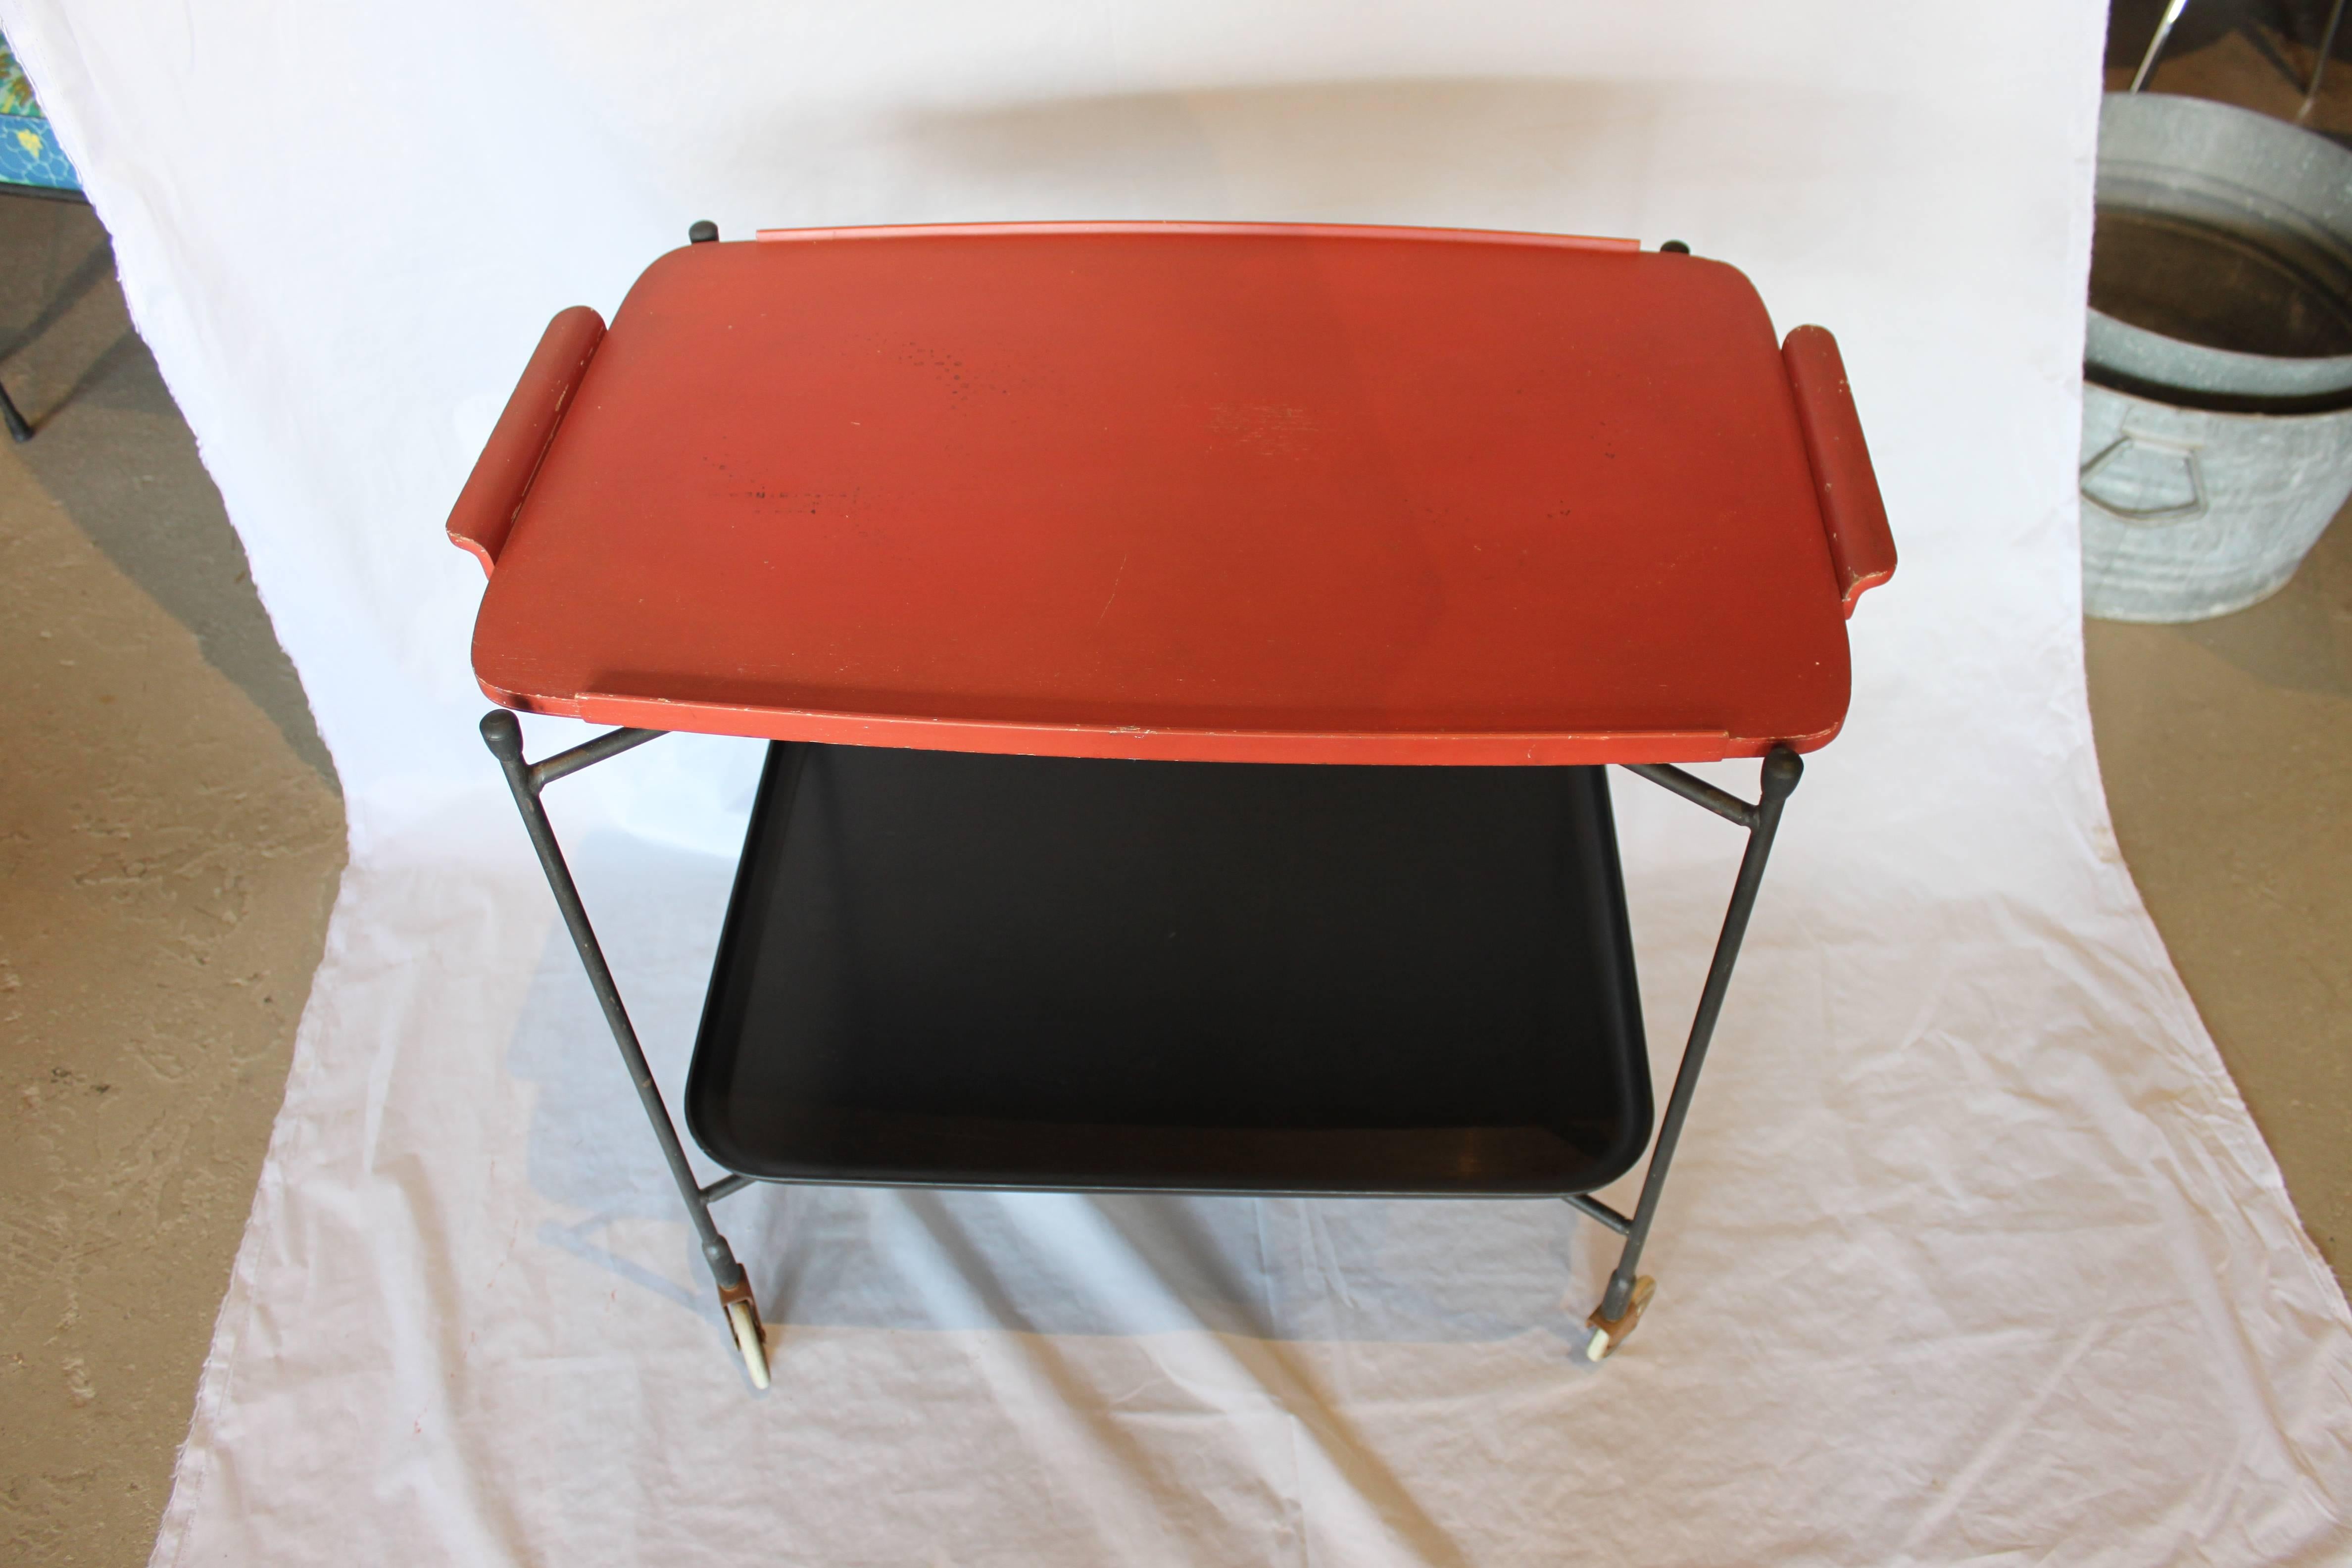 Beautiful tea or bar cart with two removable trays. Asian Inspired color combination. Red painted wood tray with minor paint loss due to age. Vintage grainware matte black acrylic tray is in mint condition. The foldable iron frame is in great shape.